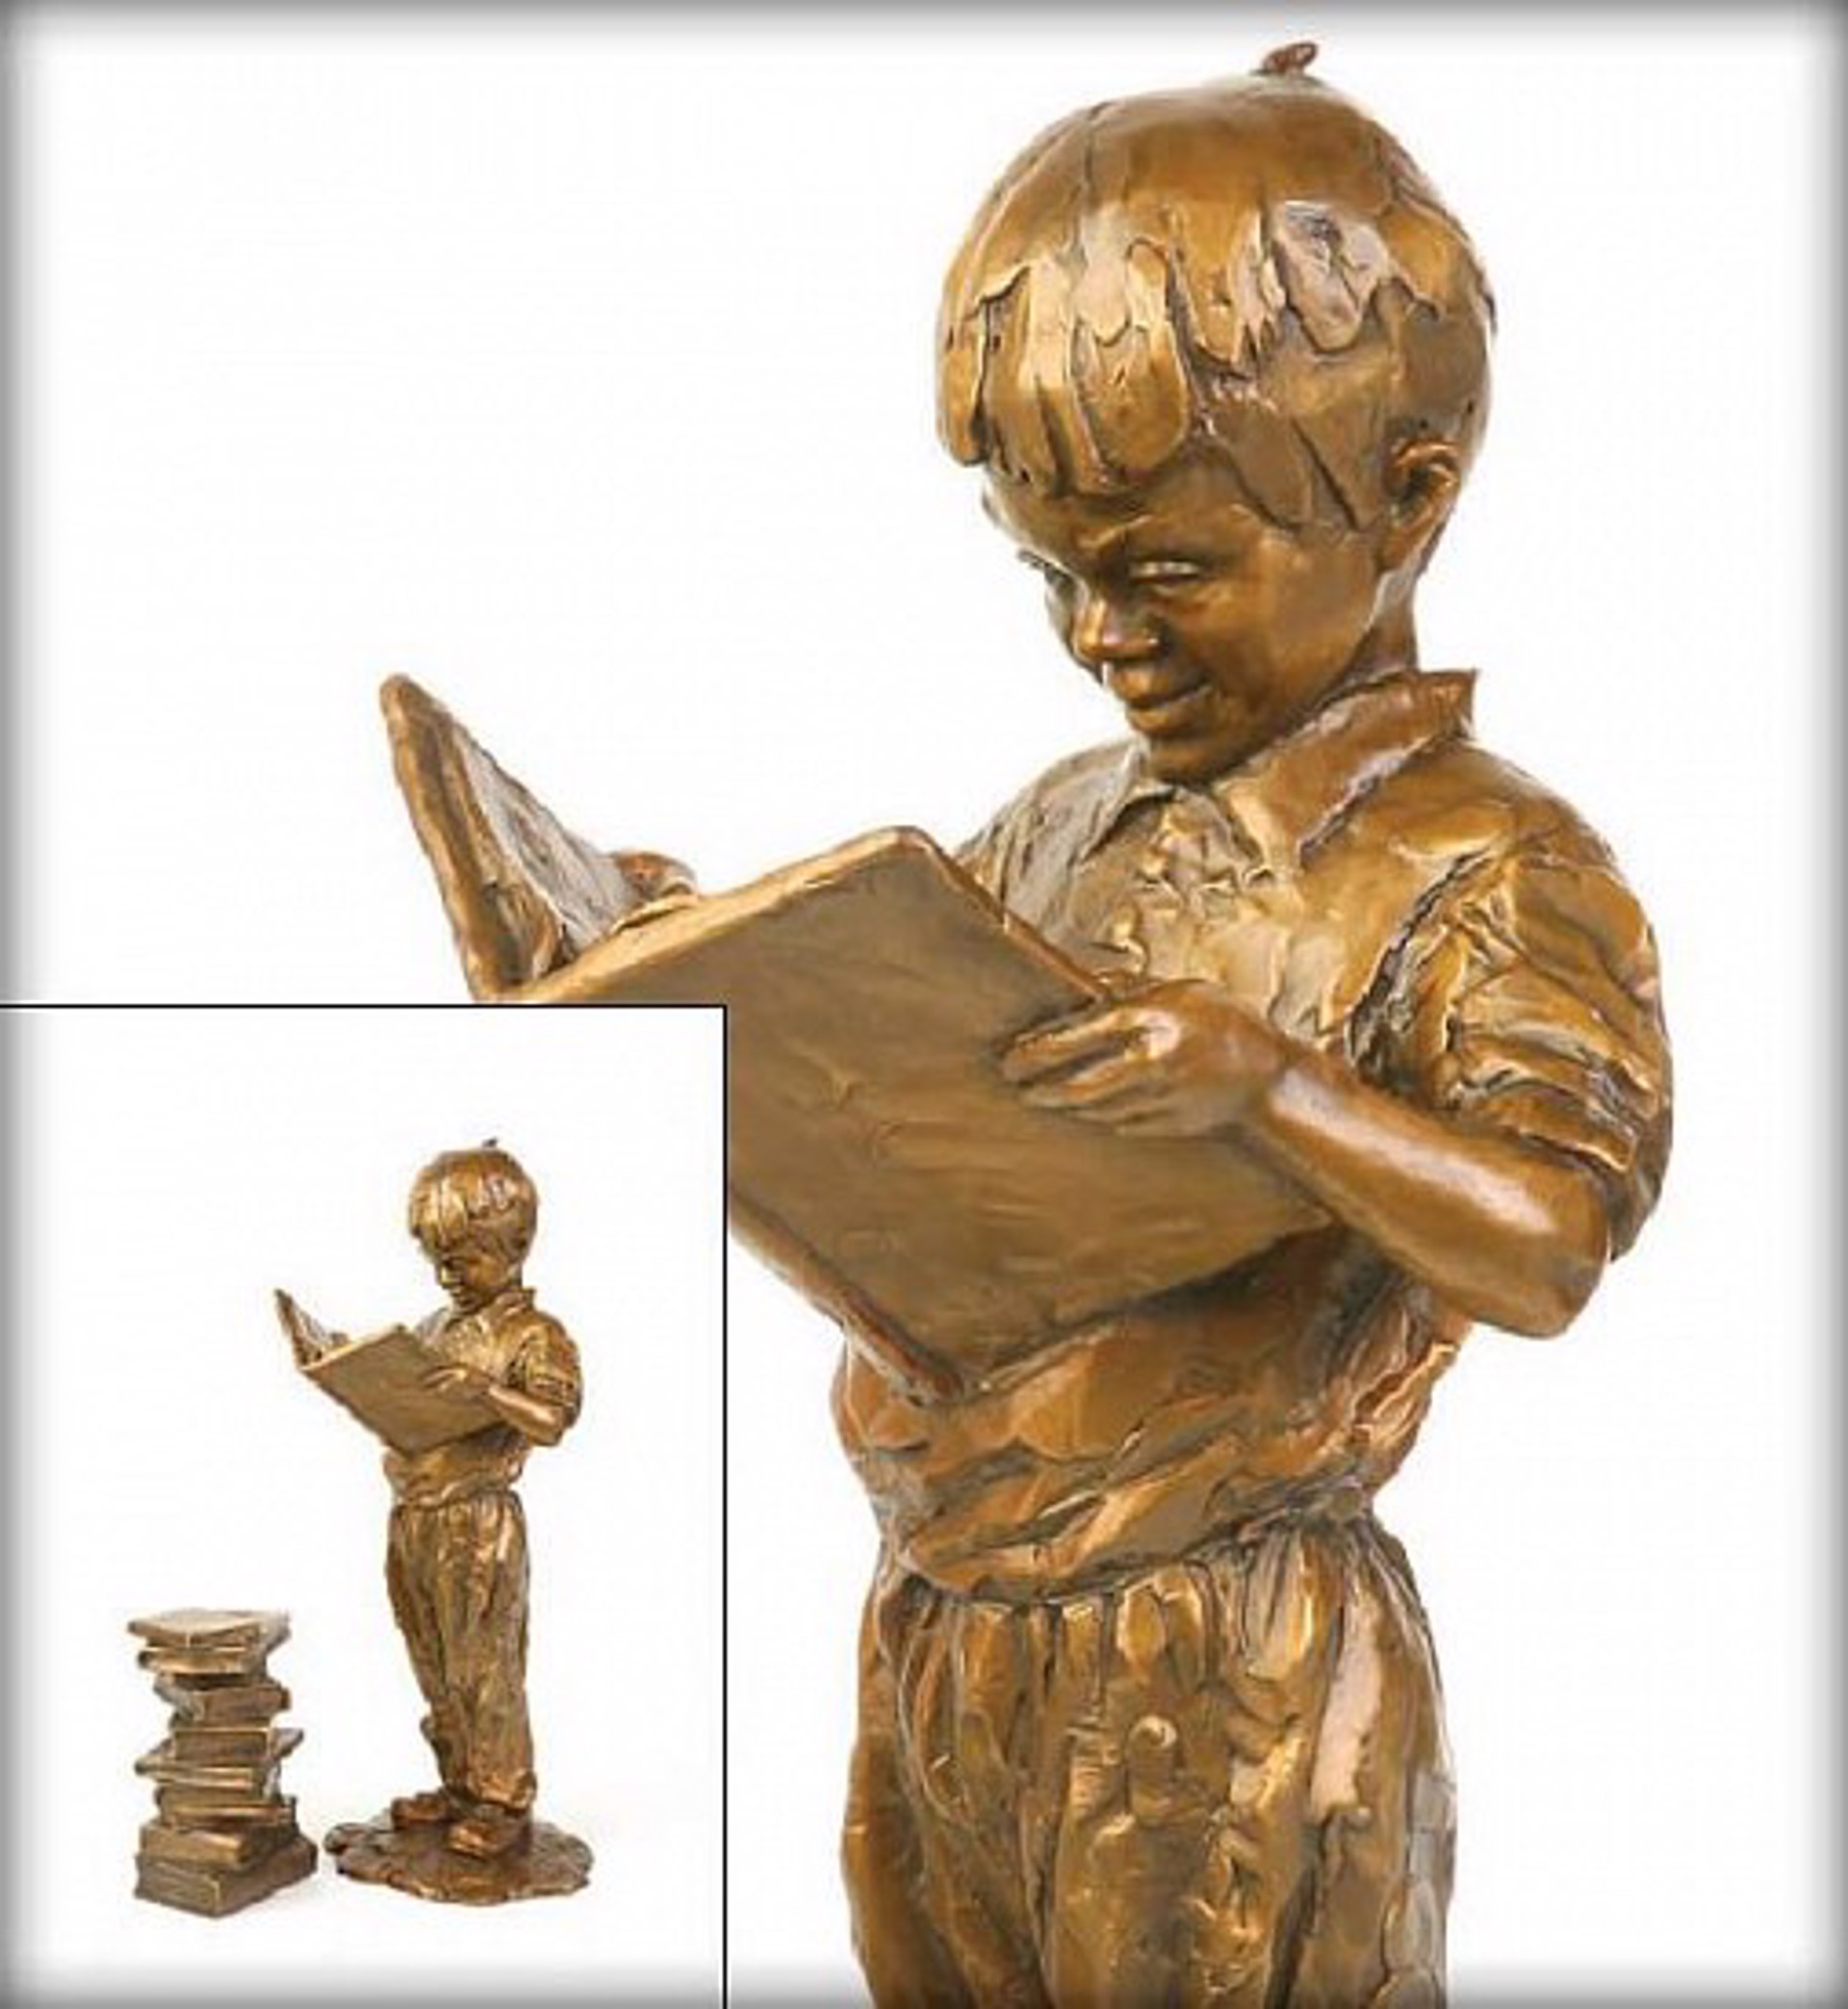 Bookworm by Gary Lee Price (sculptor)